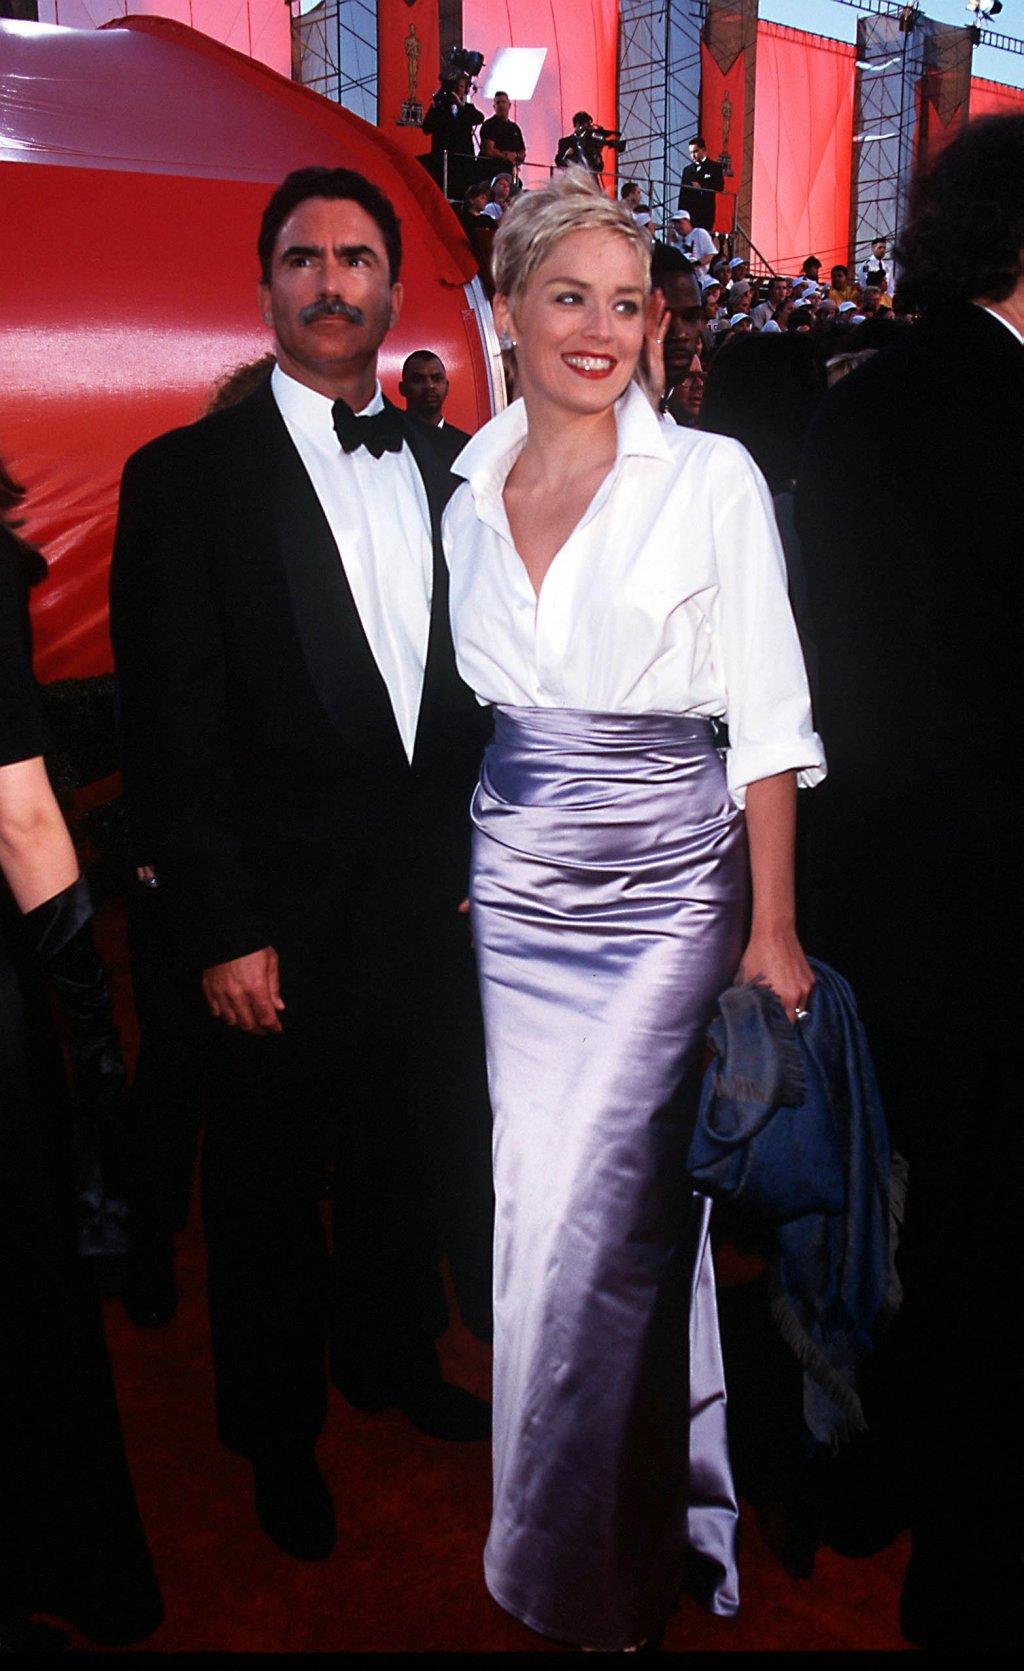 MONDAY 03/23/98  LOS ANGELES, CALIFORNIA 70th ANNUAL ACADEMY AWARDS AT THE SHRINE AUDITORIUM ARRIVALS: SHARON STONE AND HUSBAND PHOTO:  Evan Agostini/Getty Images